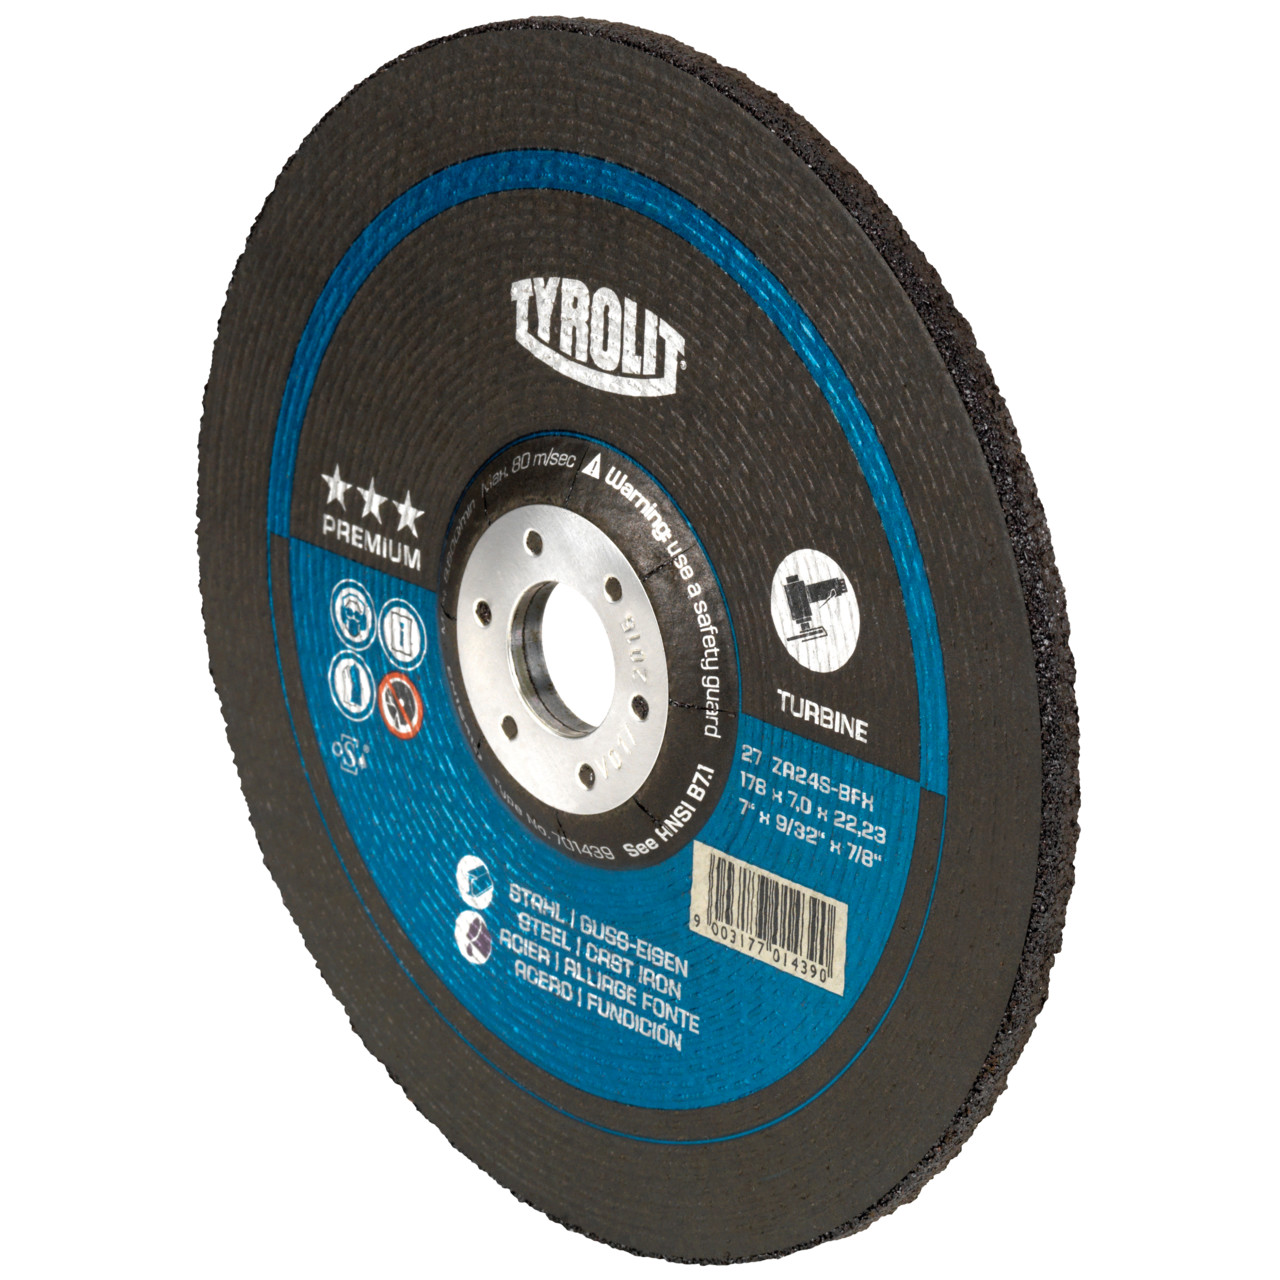 TYROLIT grinding wheel DxUxH 178x7x22.23 T-GRIND for steel and cast iron, shape: 27 - offset version, Art. 701439